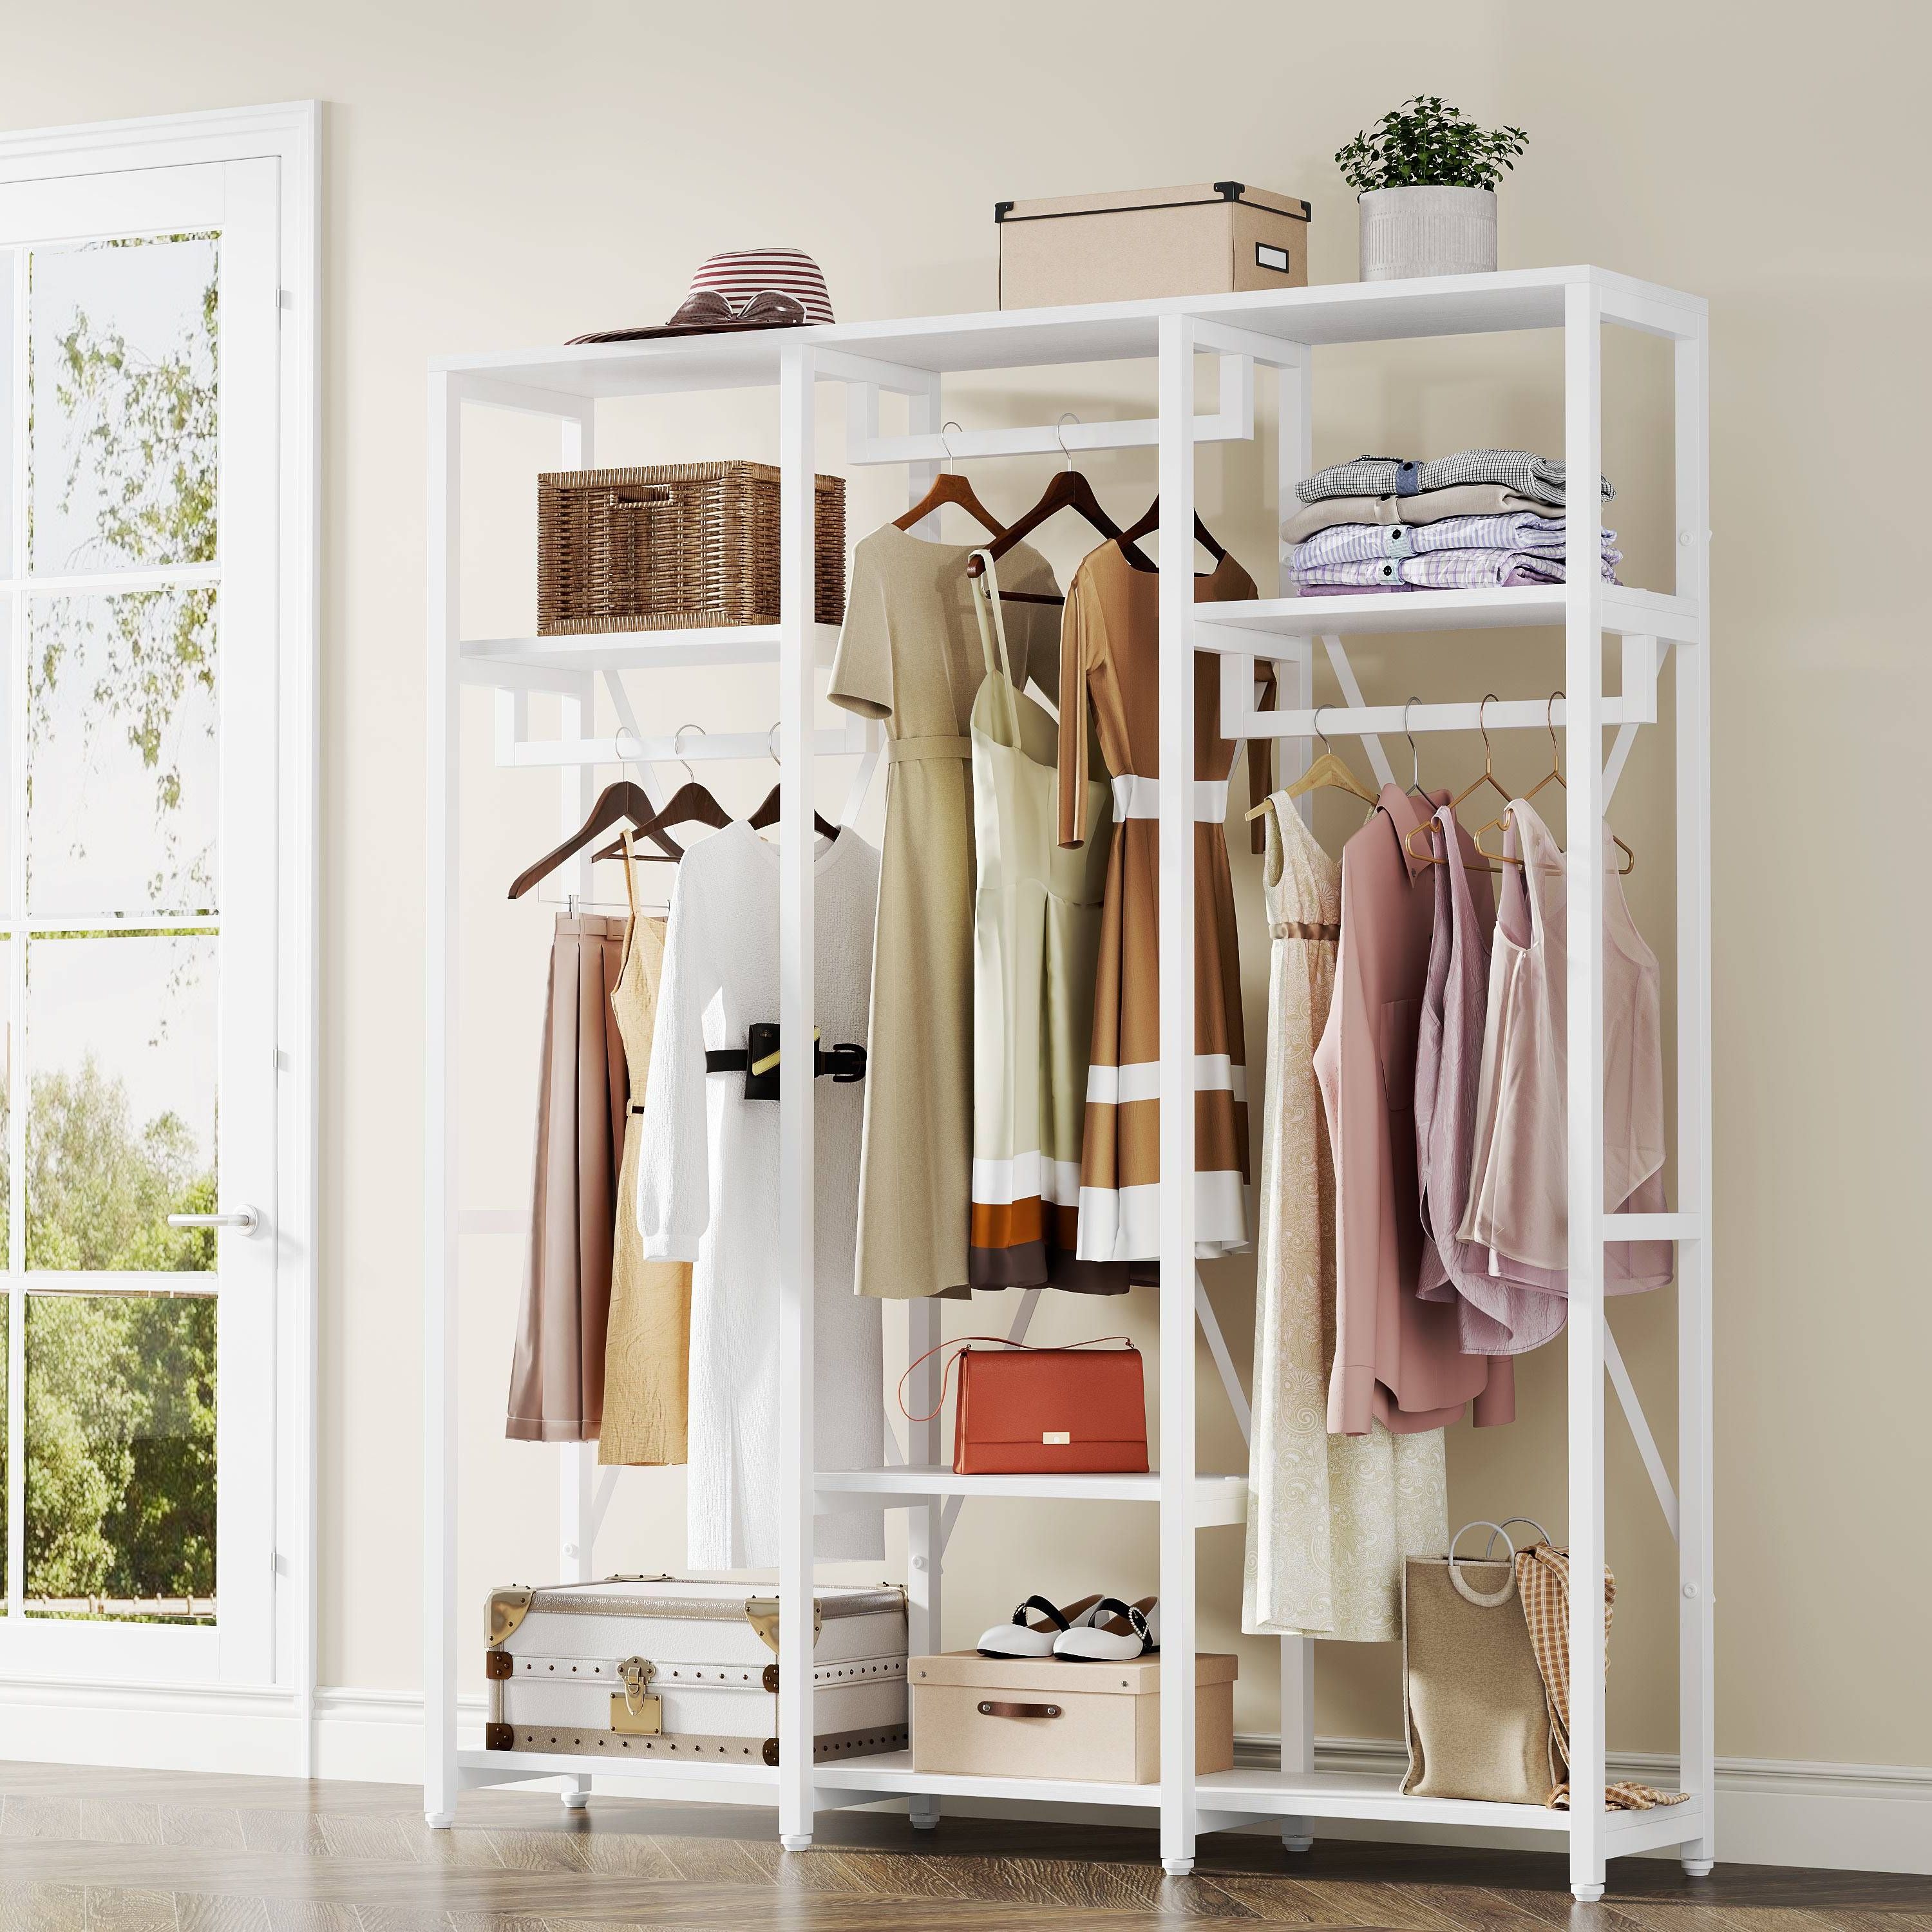 Freestanding Closet Organizer, Industrial 3 Rod Garment Rackwhite In 2023 |  Free Standing Closet, Closet Organization, Garment Racks With Regard To Wardrobes With 3 Hanging Rod (View 16 of 20)